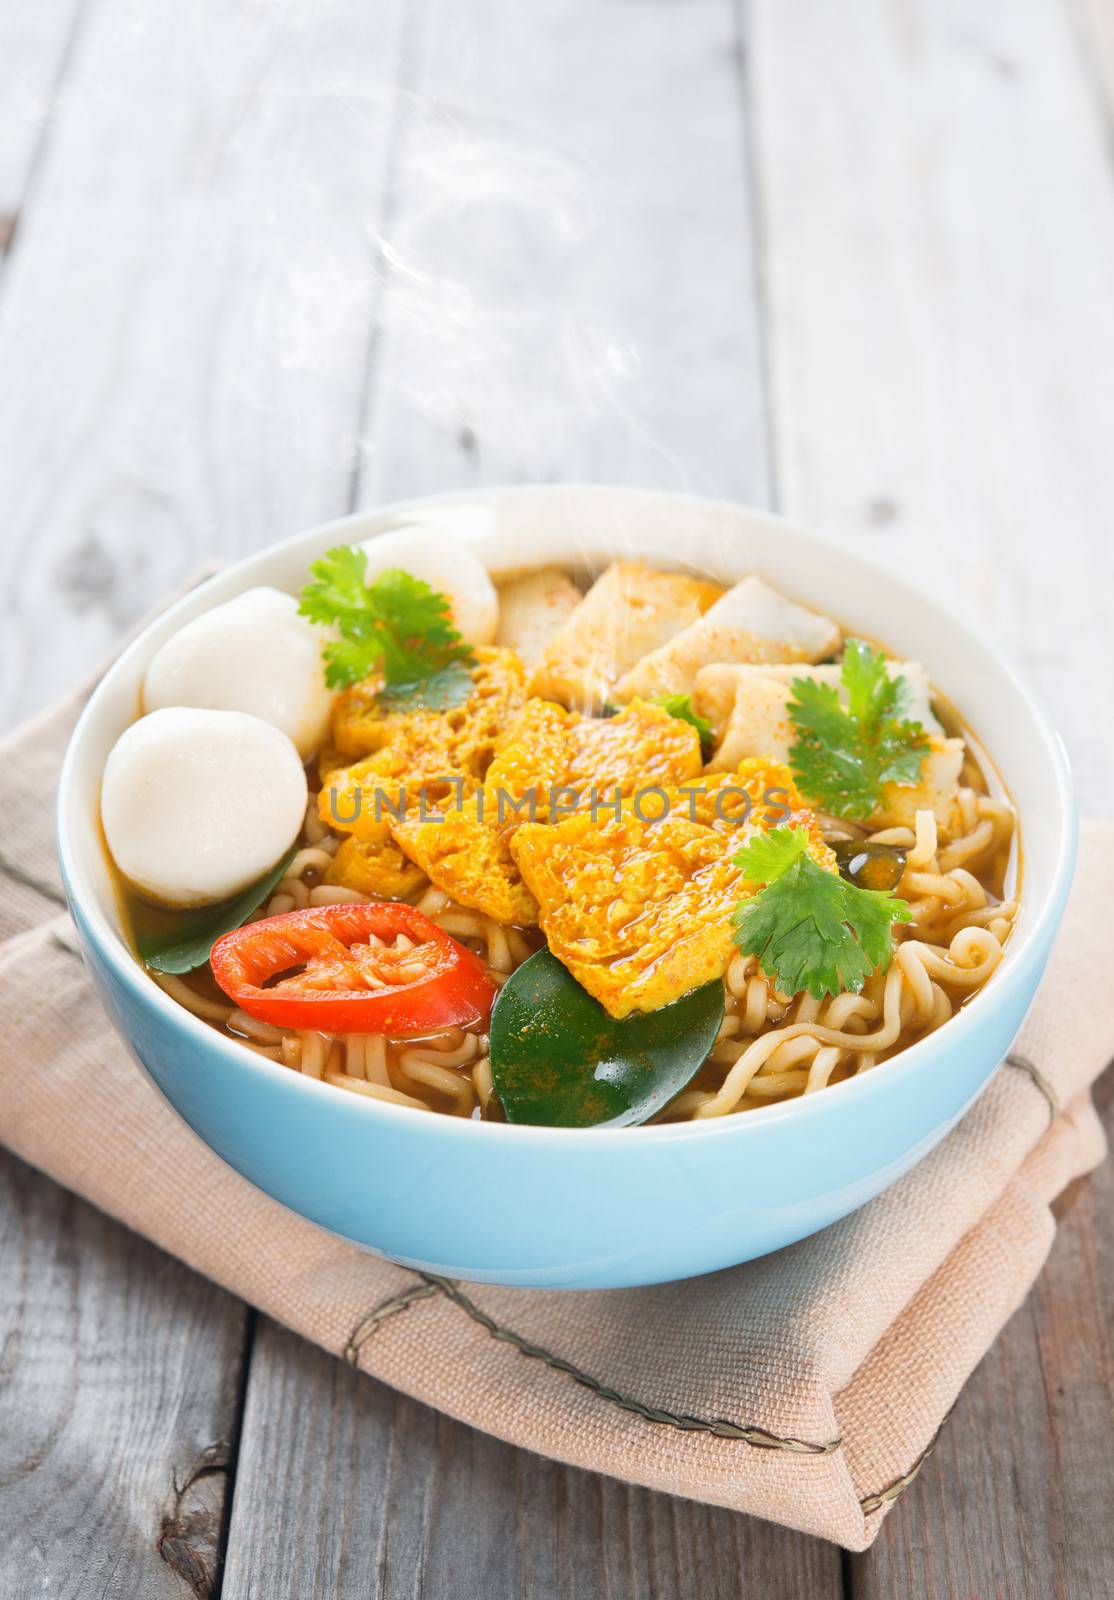 Spicy curry instant noodles. by szefei